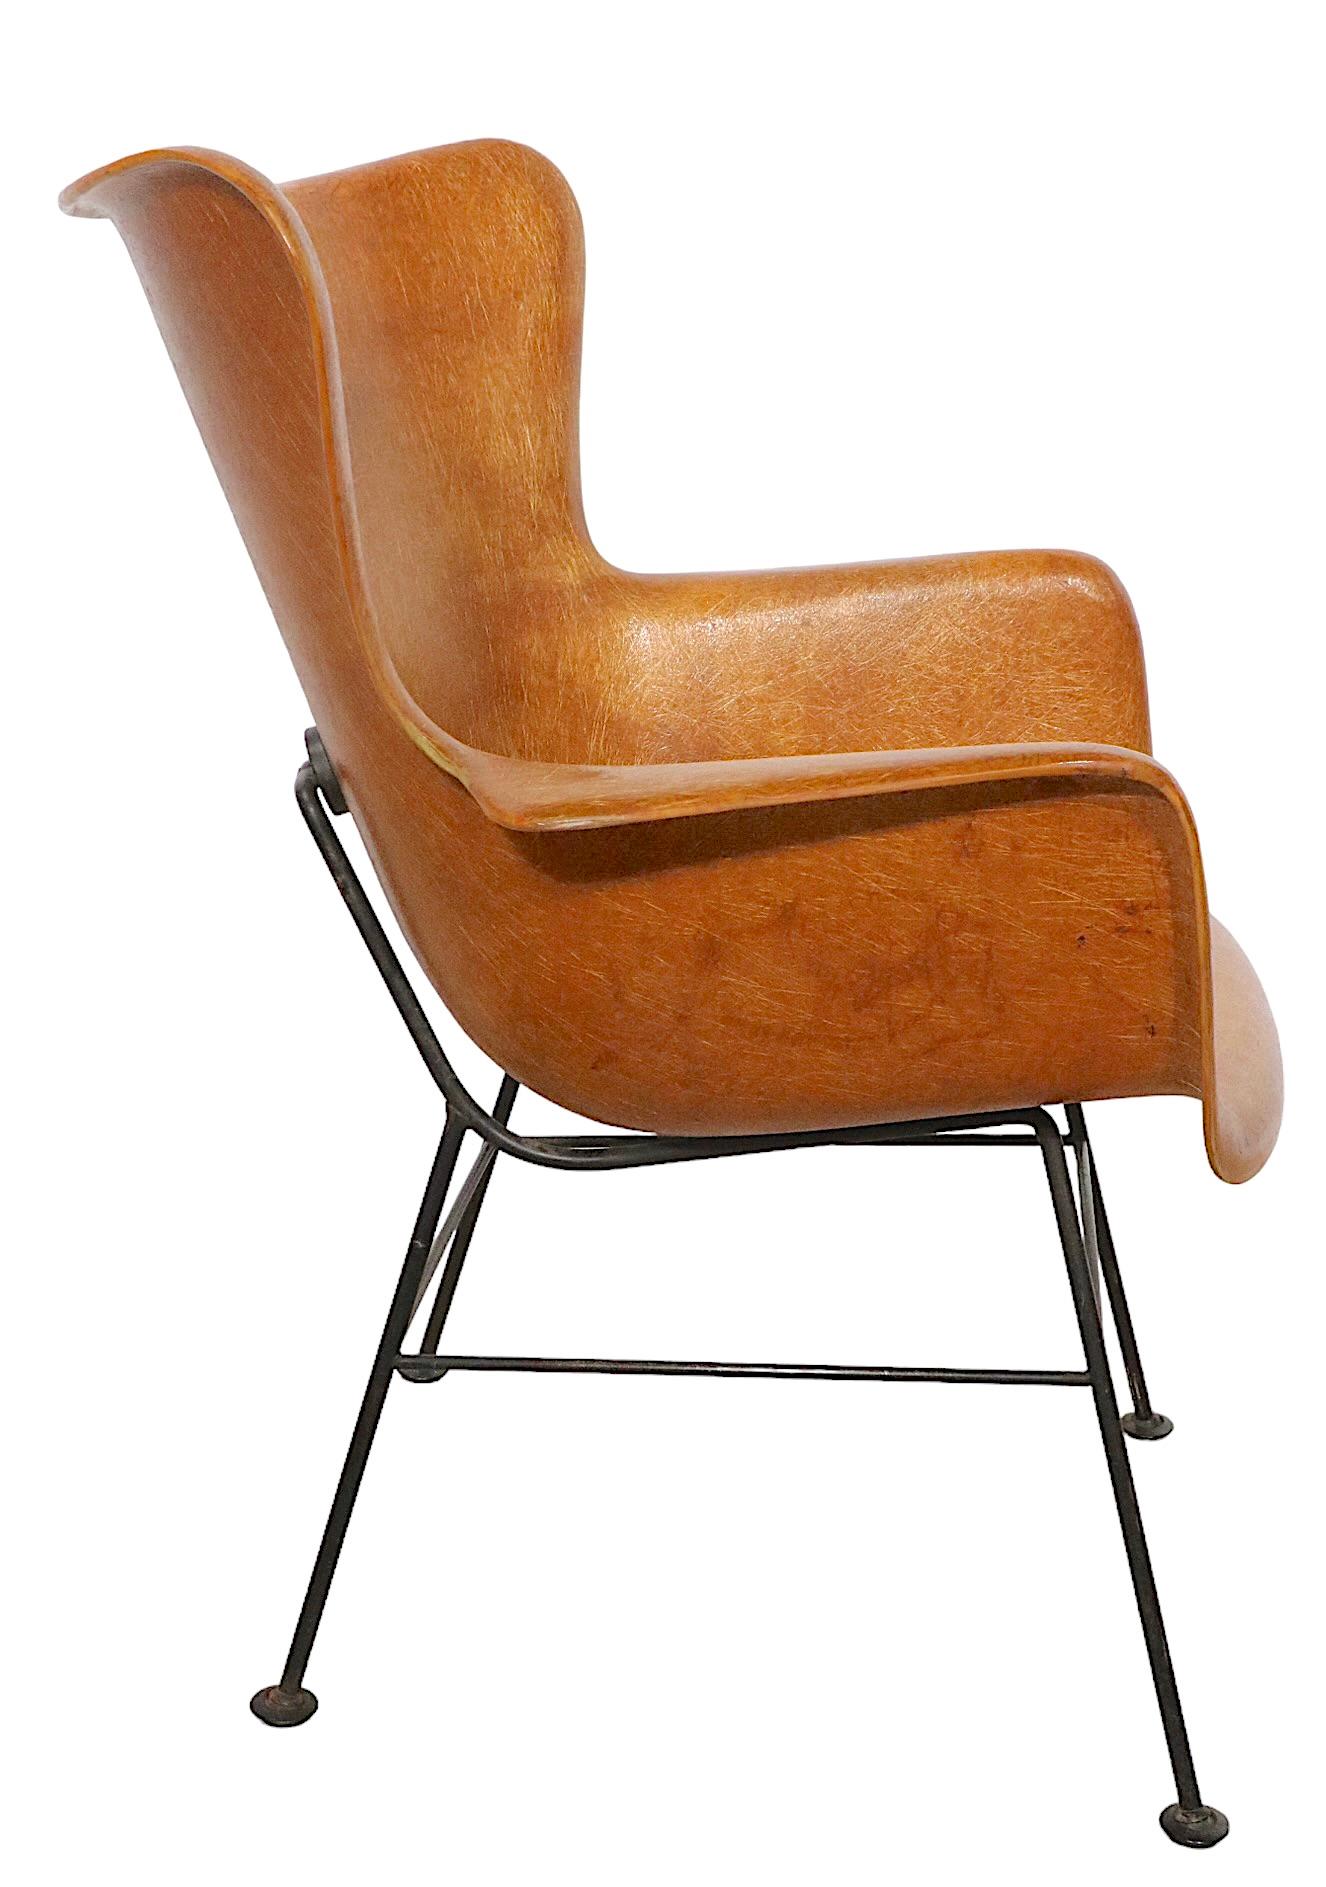 Iconic Mid Century Fiberglass Wingback Chair by Peabody for Selig, circa 1950s In Good Condition For Sale In New York, NY